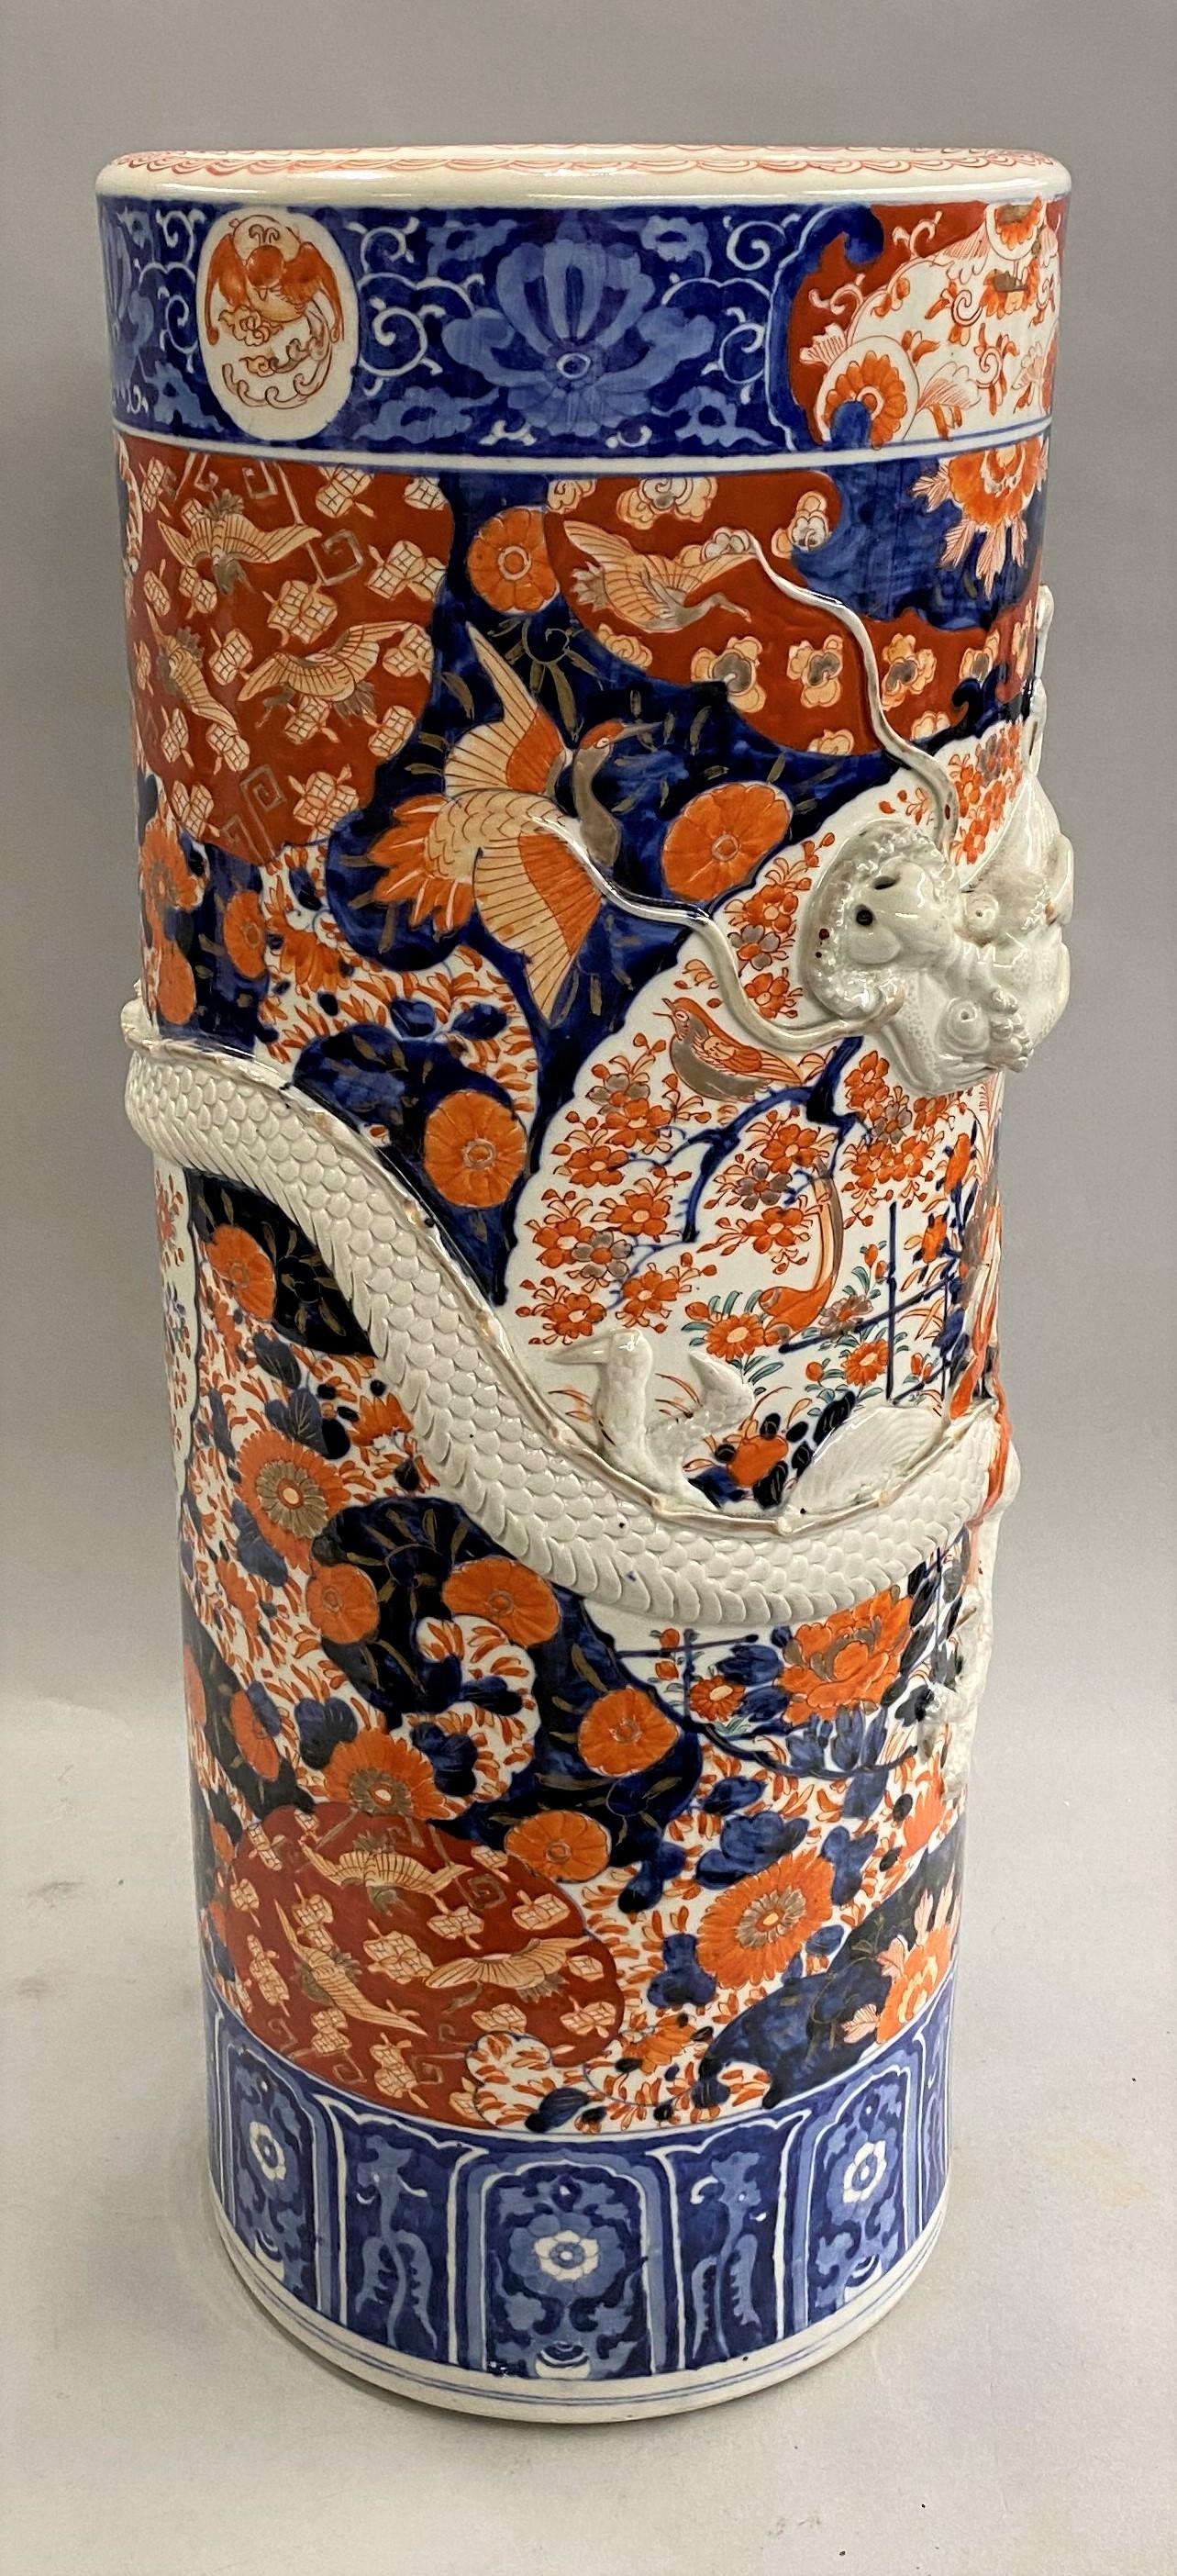 Hand-Painted 19th c. Japanese Imari Stick or Umbrella Stand with Relief Dragon Decoration